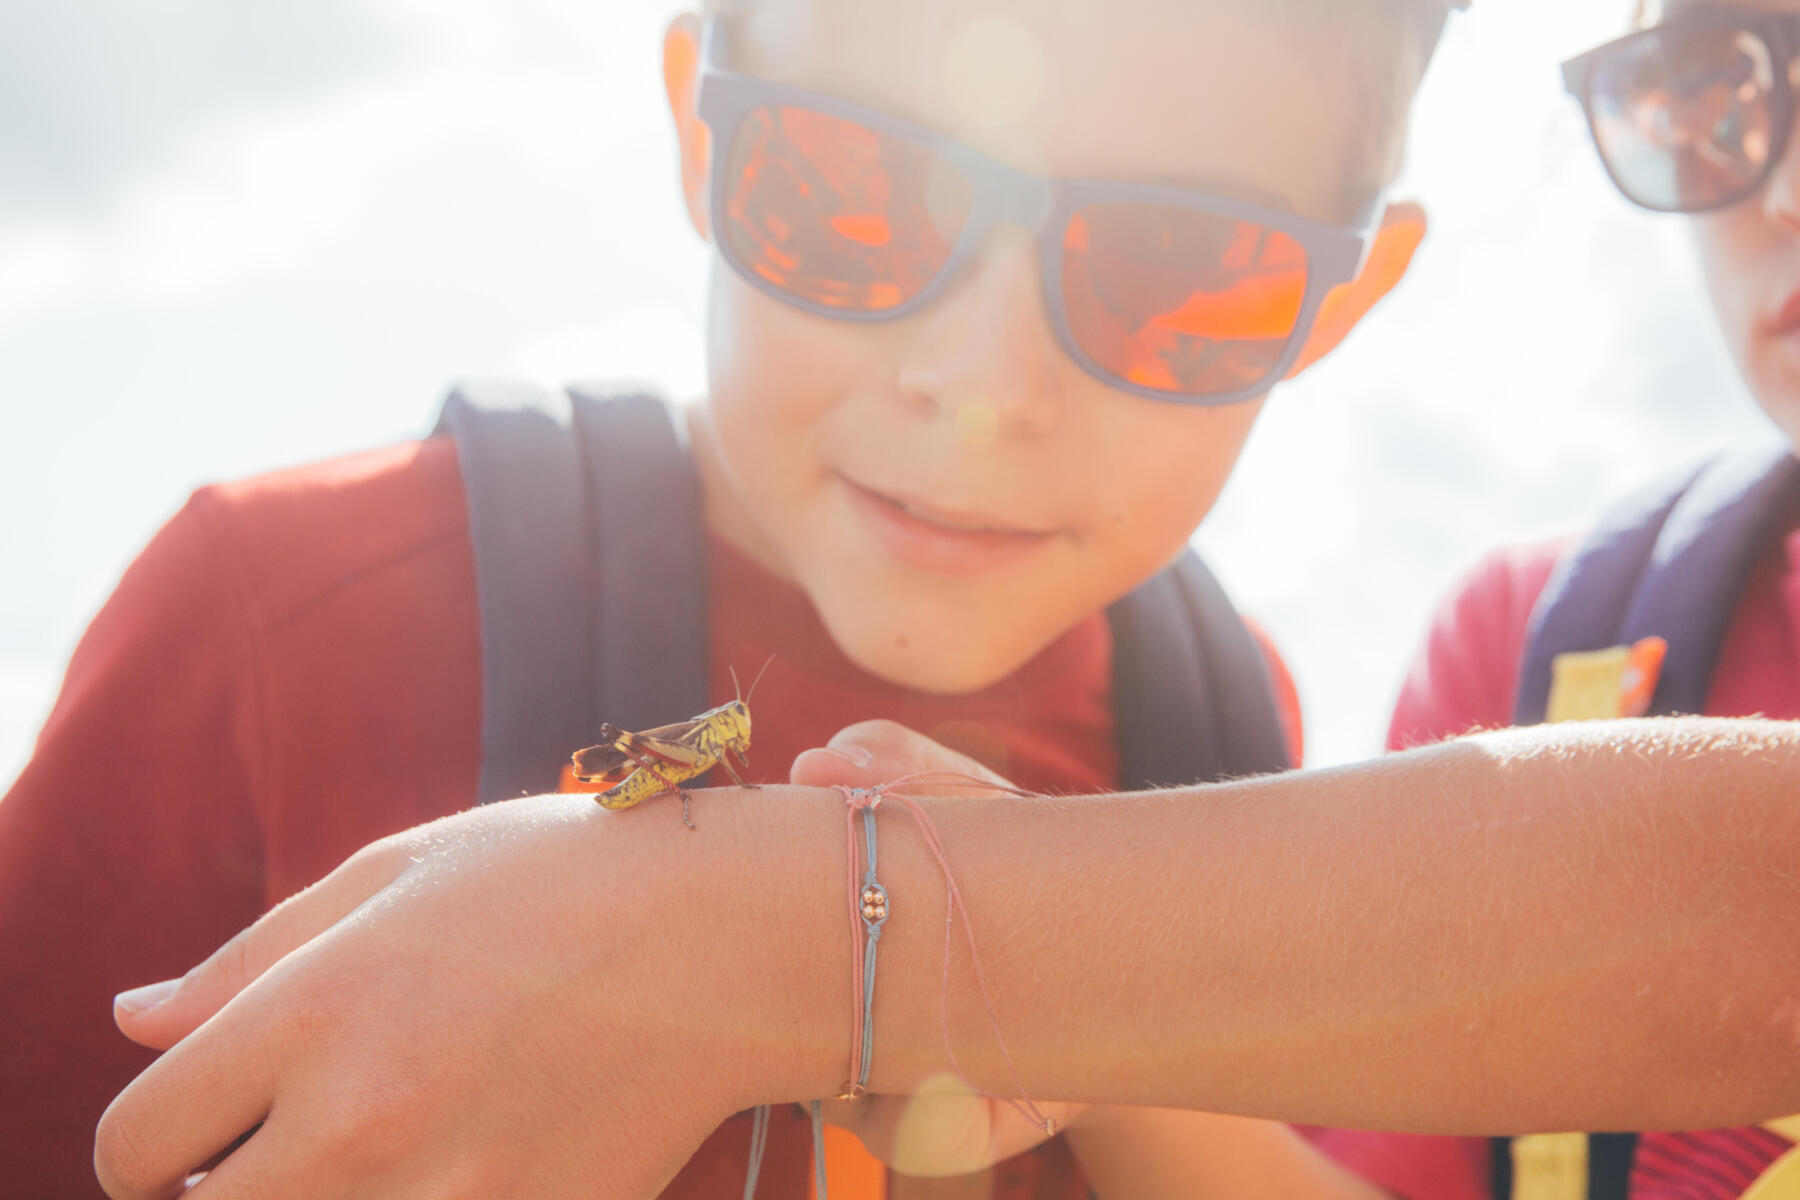 How do you motivate children whilst hiking?